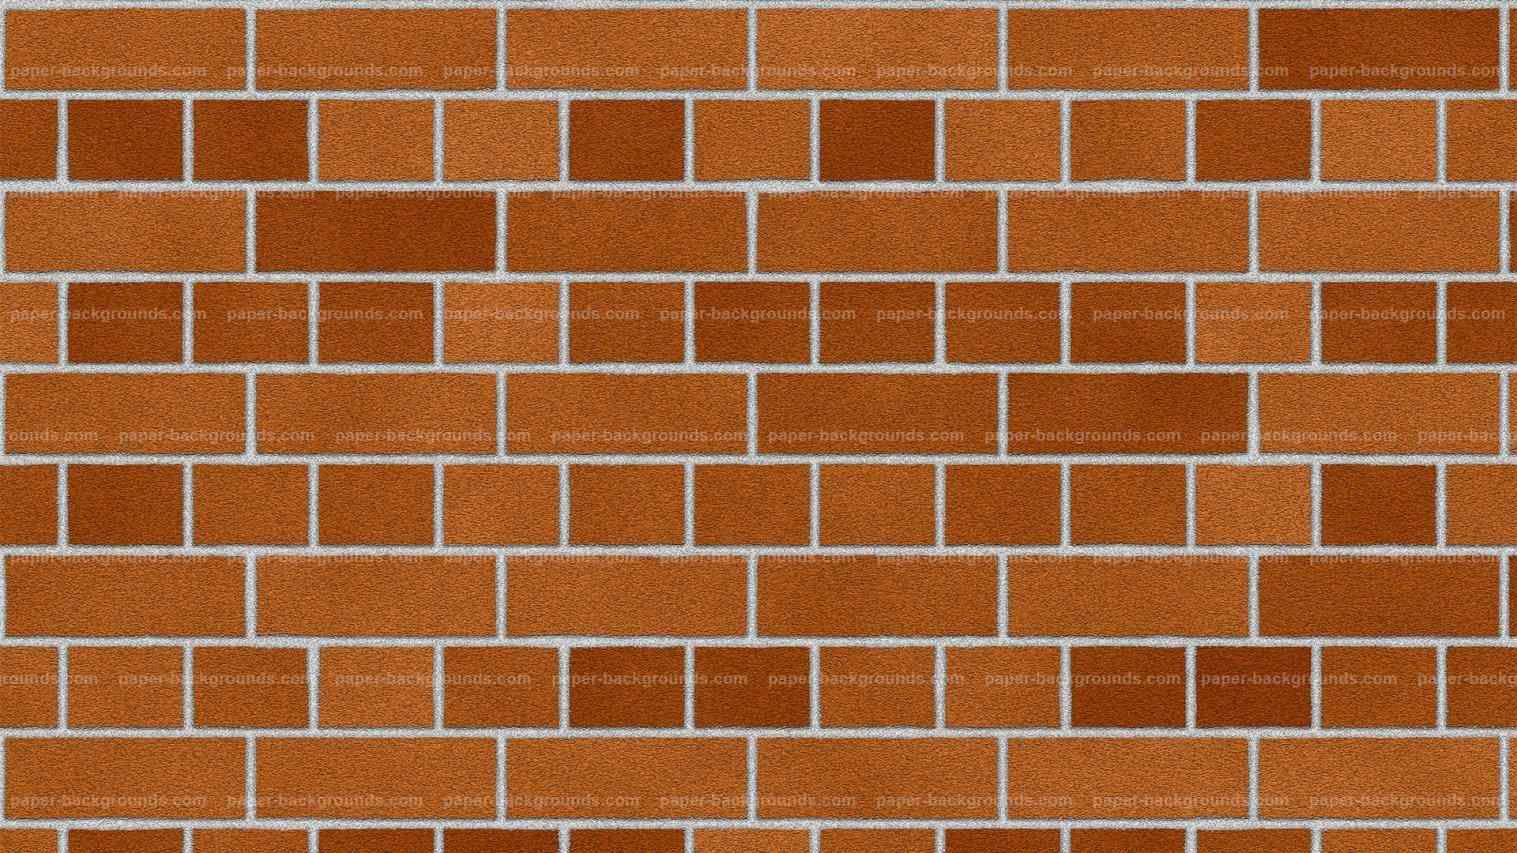 Great How To Draw A Brick  Check it out now 